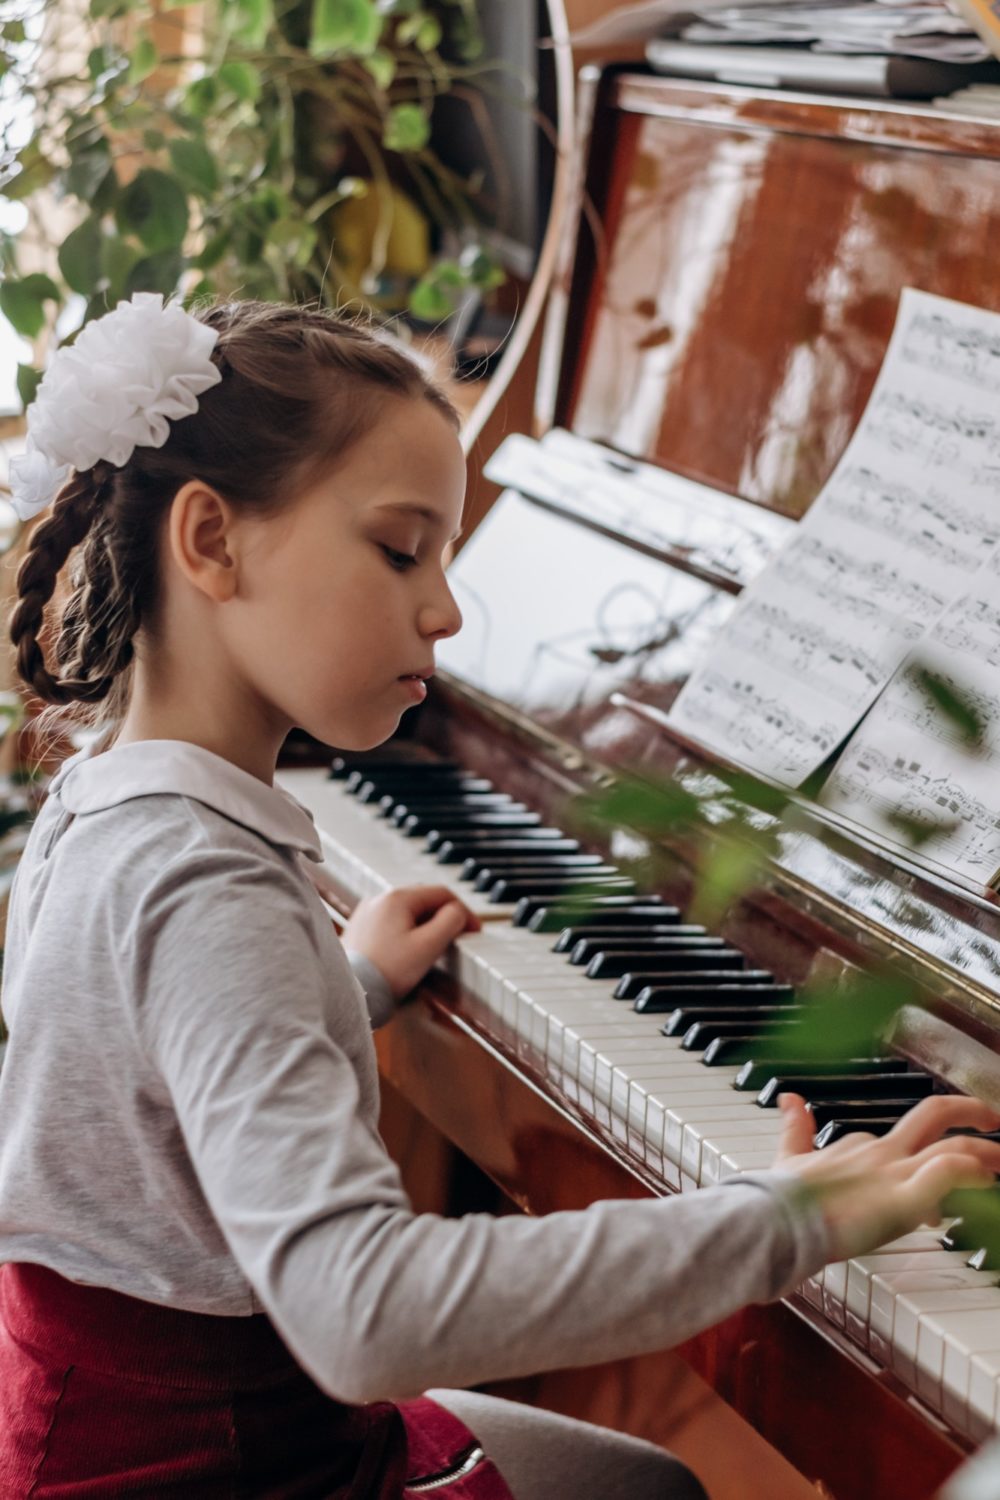 A girl with pigtails plays the piano.